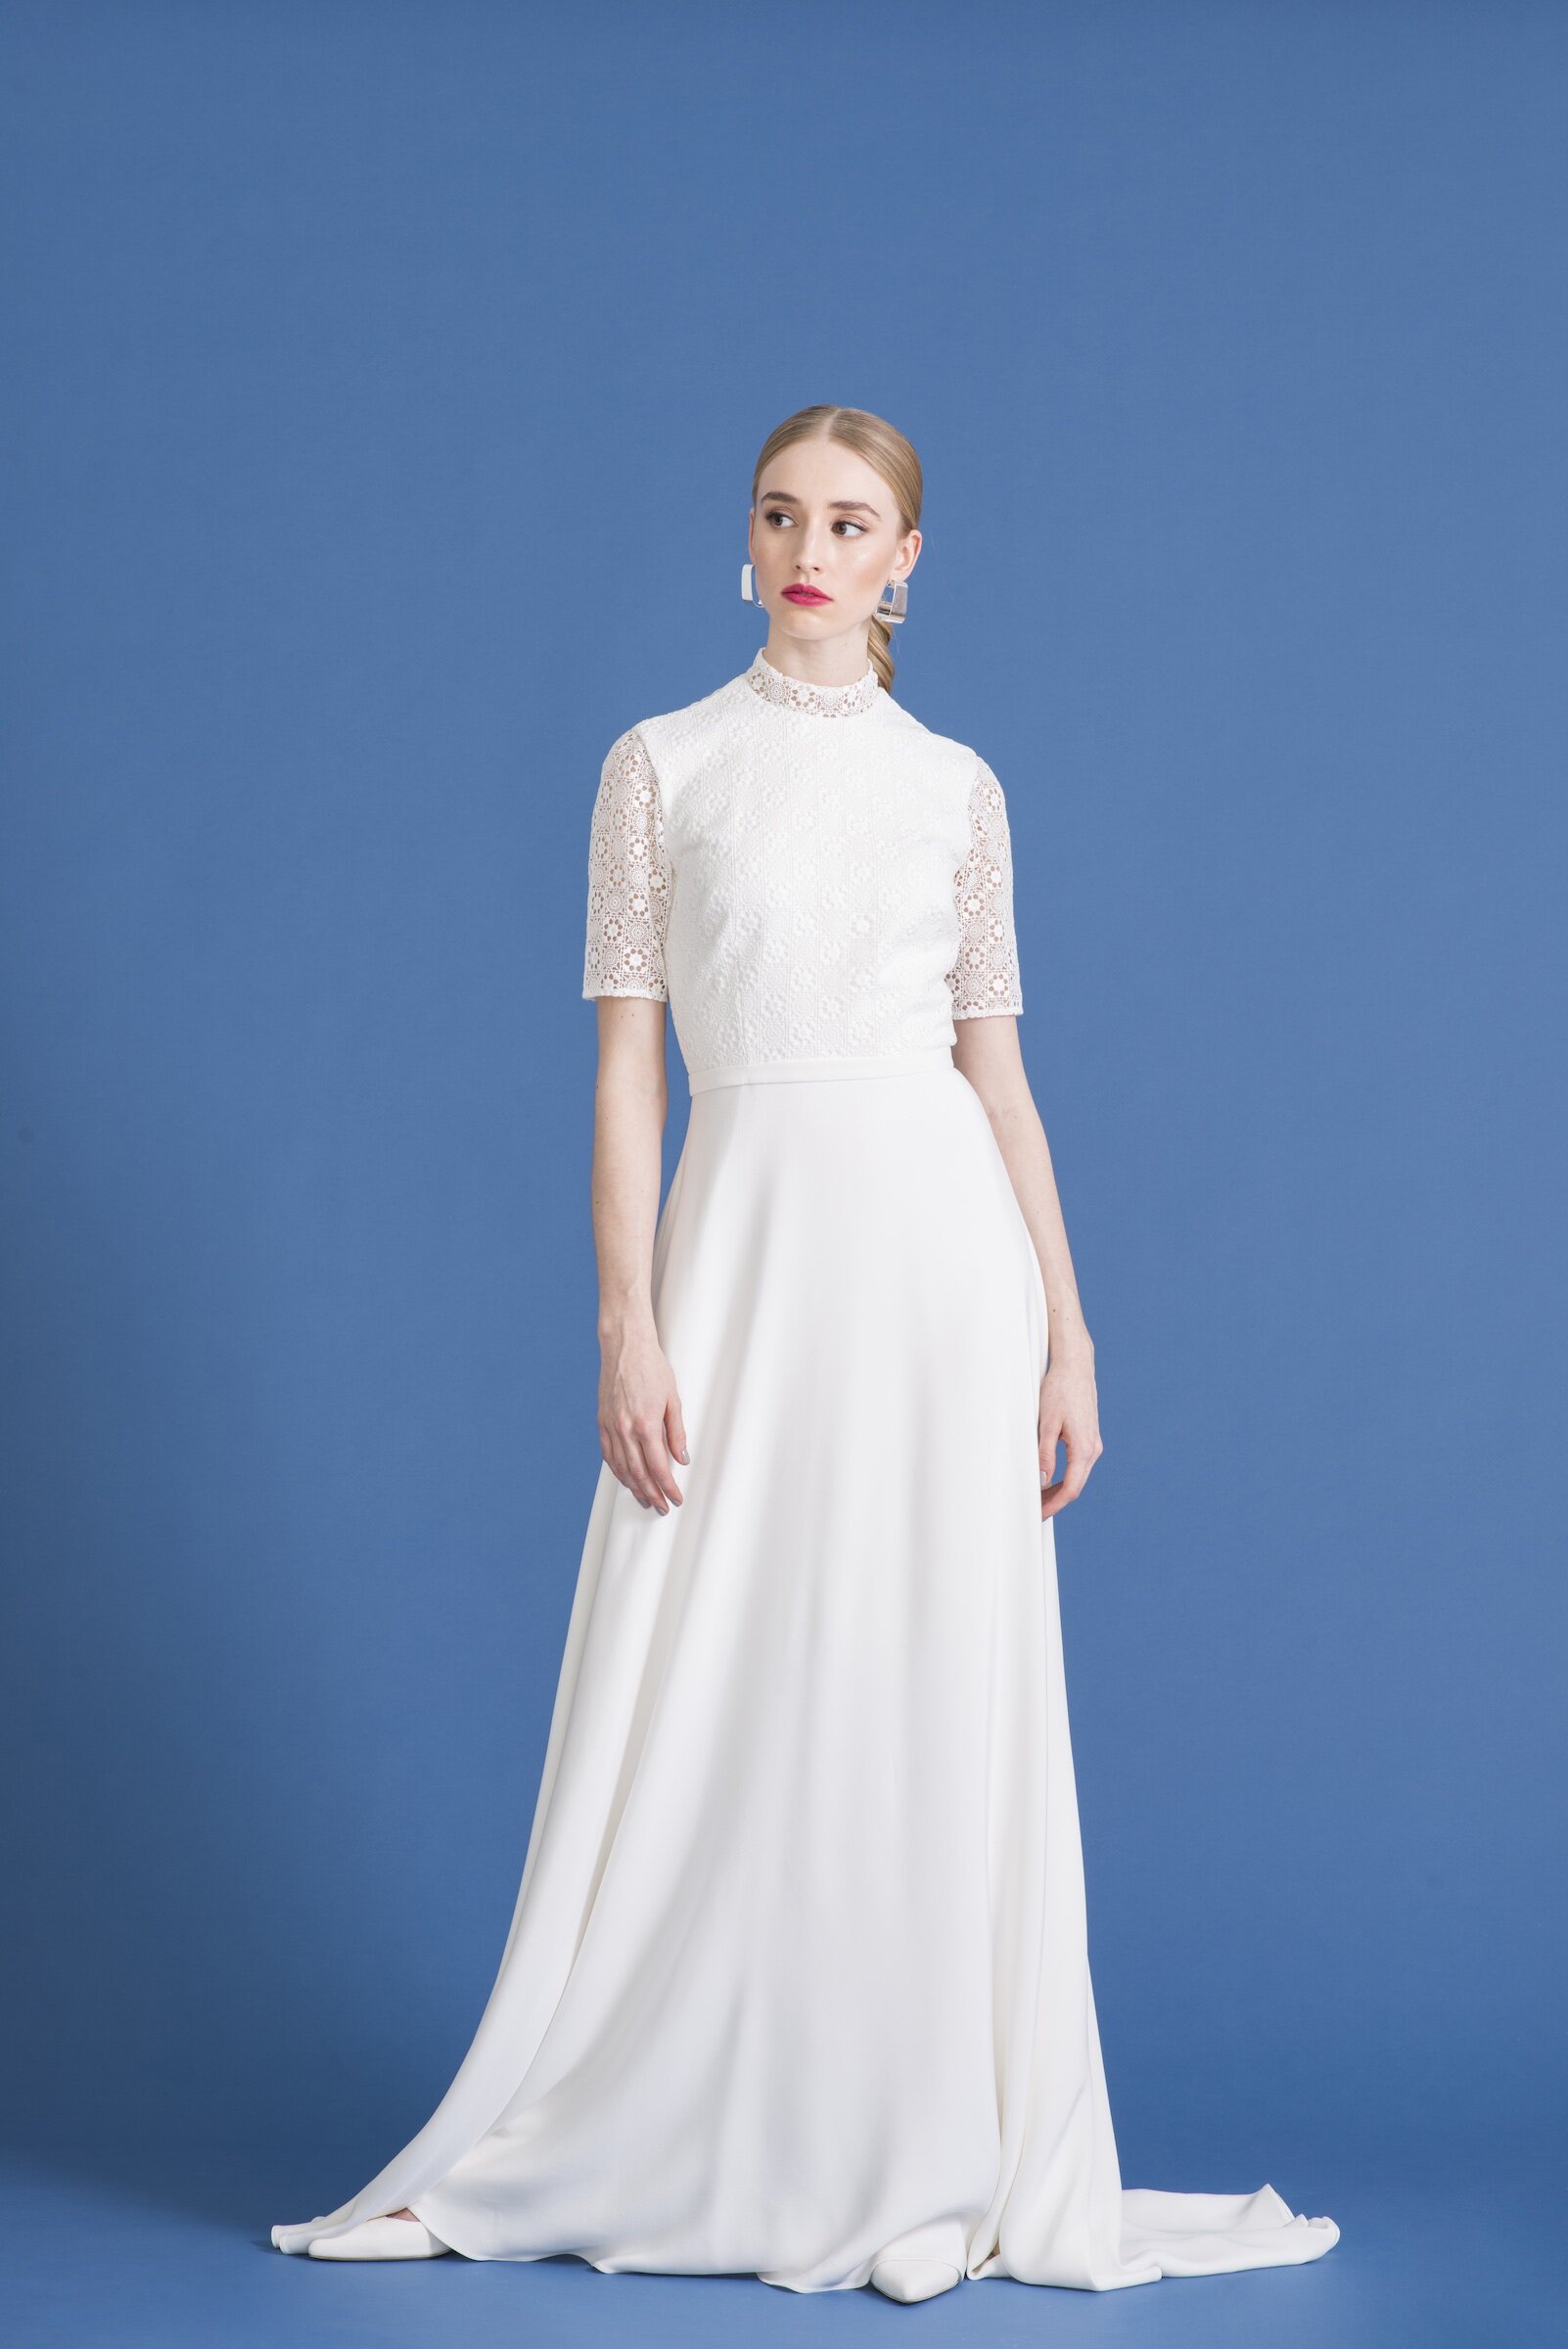 Andrea Hawkes Bridal Wear — Most Curious - The Wedding Show for the ...